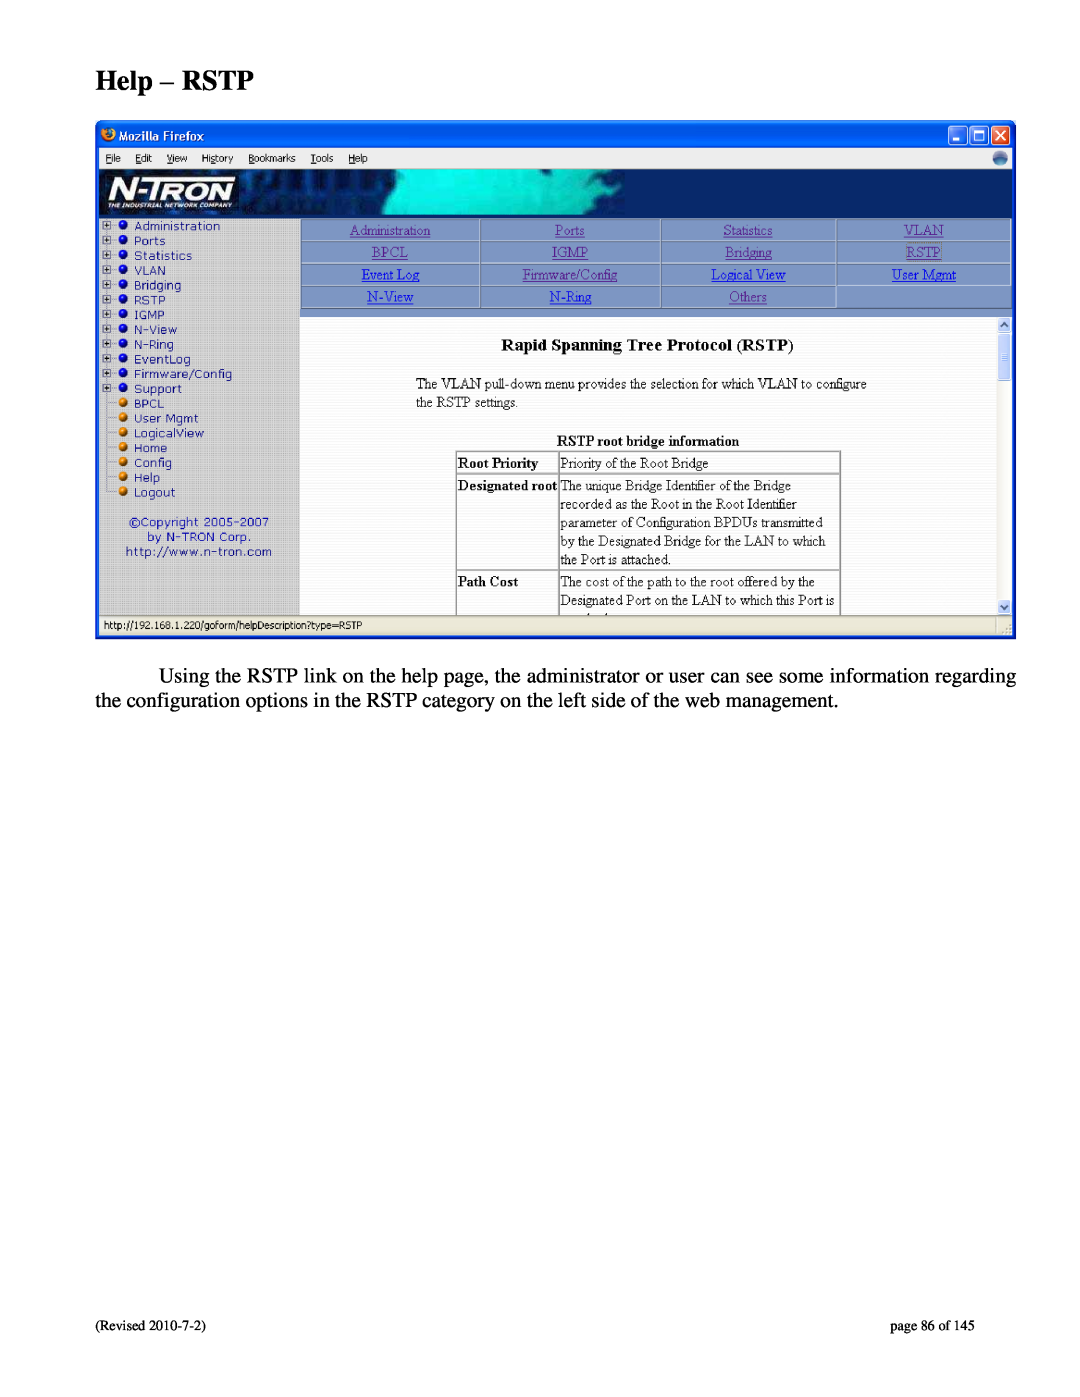 N-Tron 9000 user manual Help - RSTP, page 86 of 